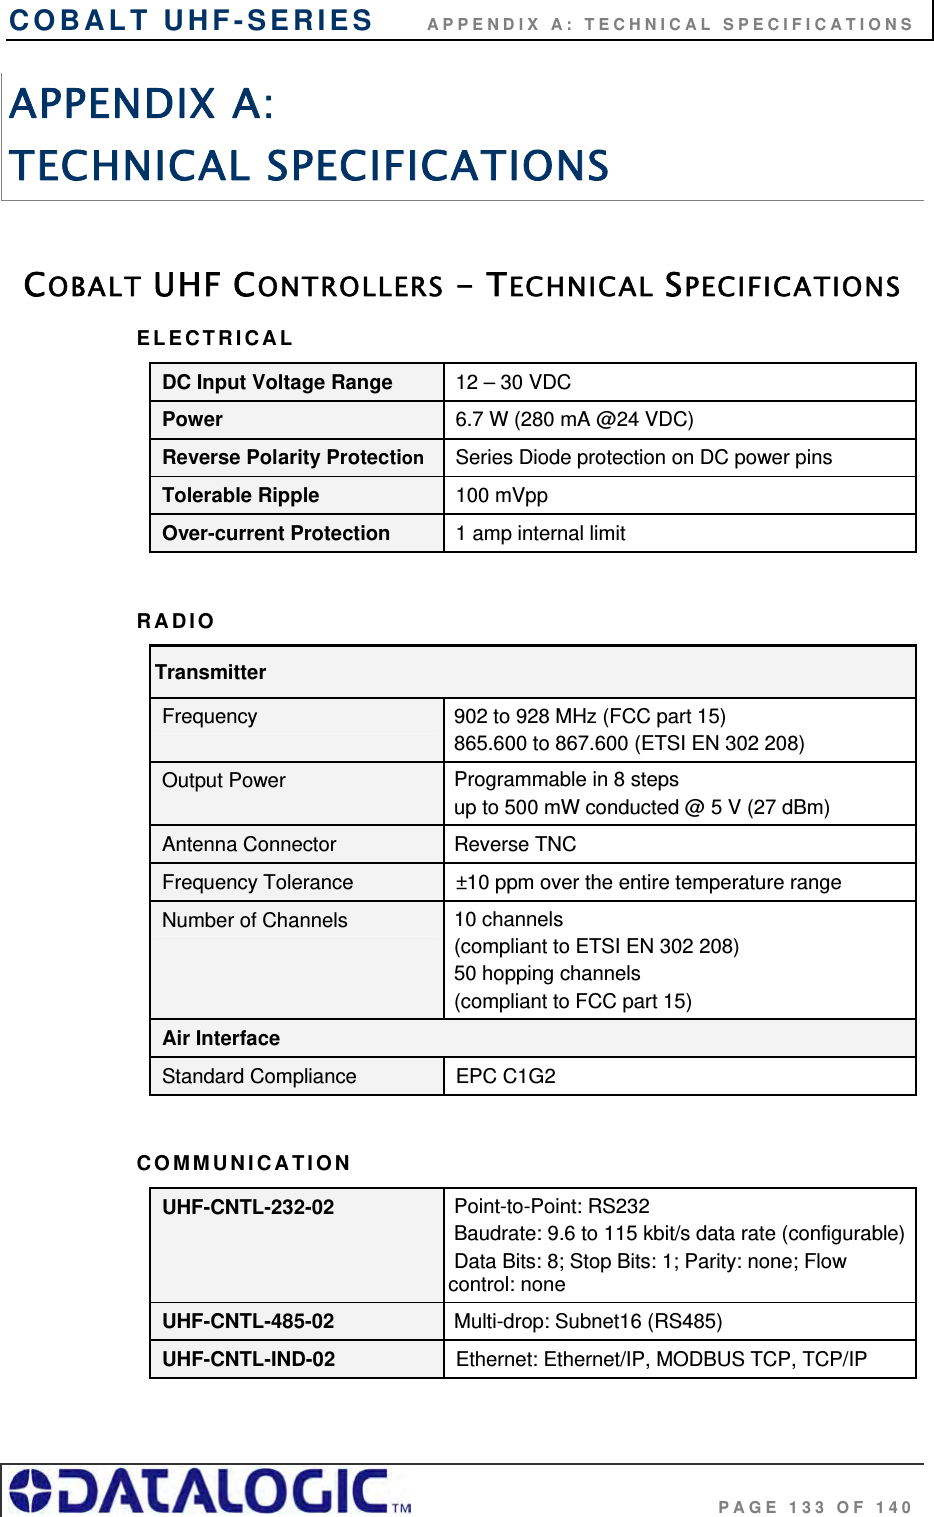 COBALT UHF-SERIES      APPENDIX A: TECHNICAL SPECIFICATIONS                                     PAGE 133 OF 140 APPENDIX A:  TECHNICAL SPECIFICATIONS  COBALT UHF CONTROLLERS - TECHNICAL SPECIFICATIONS ELECTRICAL DC Input Voltage Range 12 – 30 VDC Power 6.7 W (280 mA @24 VDC) Reverse Polarity Protection  Series Diode protection on DC power pins Tolerable Ripple 100 mVpp Over-current Protection 1 amp internal limit  RADIO Transmitter Frequency  902 to 928 MHz (FCC part 15)   865.600 to 867.600 (ETSI EN 302 208) Output Power  Programmable in 8 steps  up to 500 mW conducted @ 5 V (27 dBm) Antenna Connector  Reverse TNC Frequency Tolerance ±10 ppm over the entire temperature range Number of Channels  10 channels  (compliant to ETSI EN 302 208)  50 hopping channels  (compliant to FCC part 15) Air Interface Standard Compliance EPC C1G2  COMMUNICATION UHF-CNTL-232-02  Point-to-Point: RS232  Baudrate: 9.6 to 115 kbit/s data rate (configurable) Data Bits: 8; Stop Bits: 1; Parity: none; Flow control: none UHF-CNTL-485-02  Multi-drop: Subnet16 (RS485) UHF-CNTL-IND-02 Ethernet: Ethernet/IP, MODBUS TCP, TCP/IP  